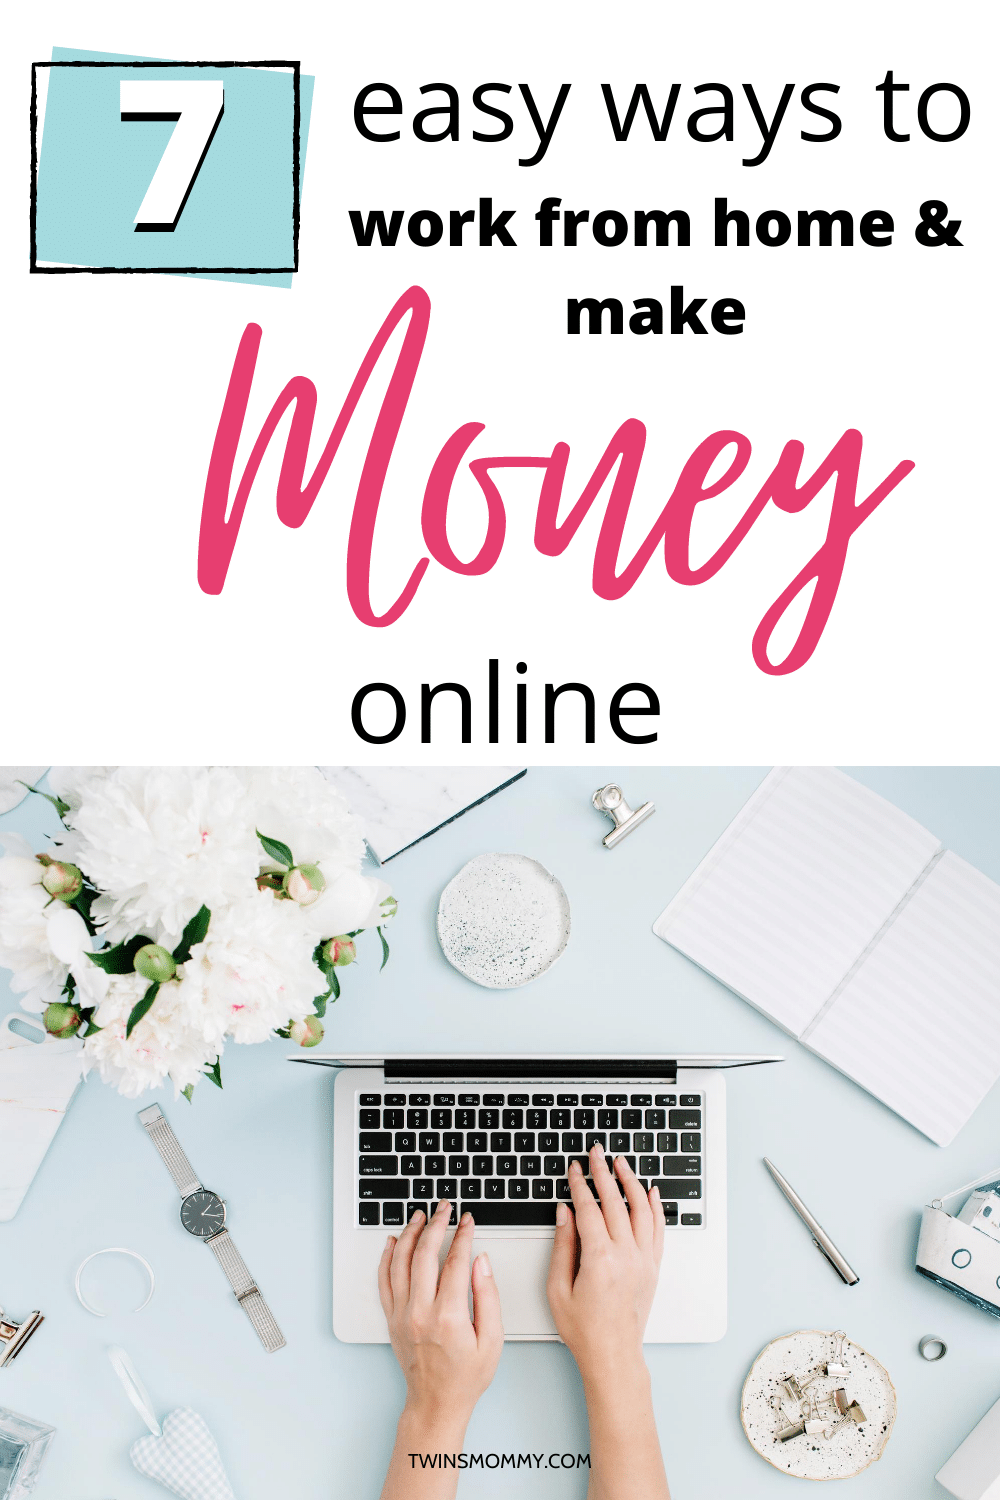 How to Make Money From Home in 2019
